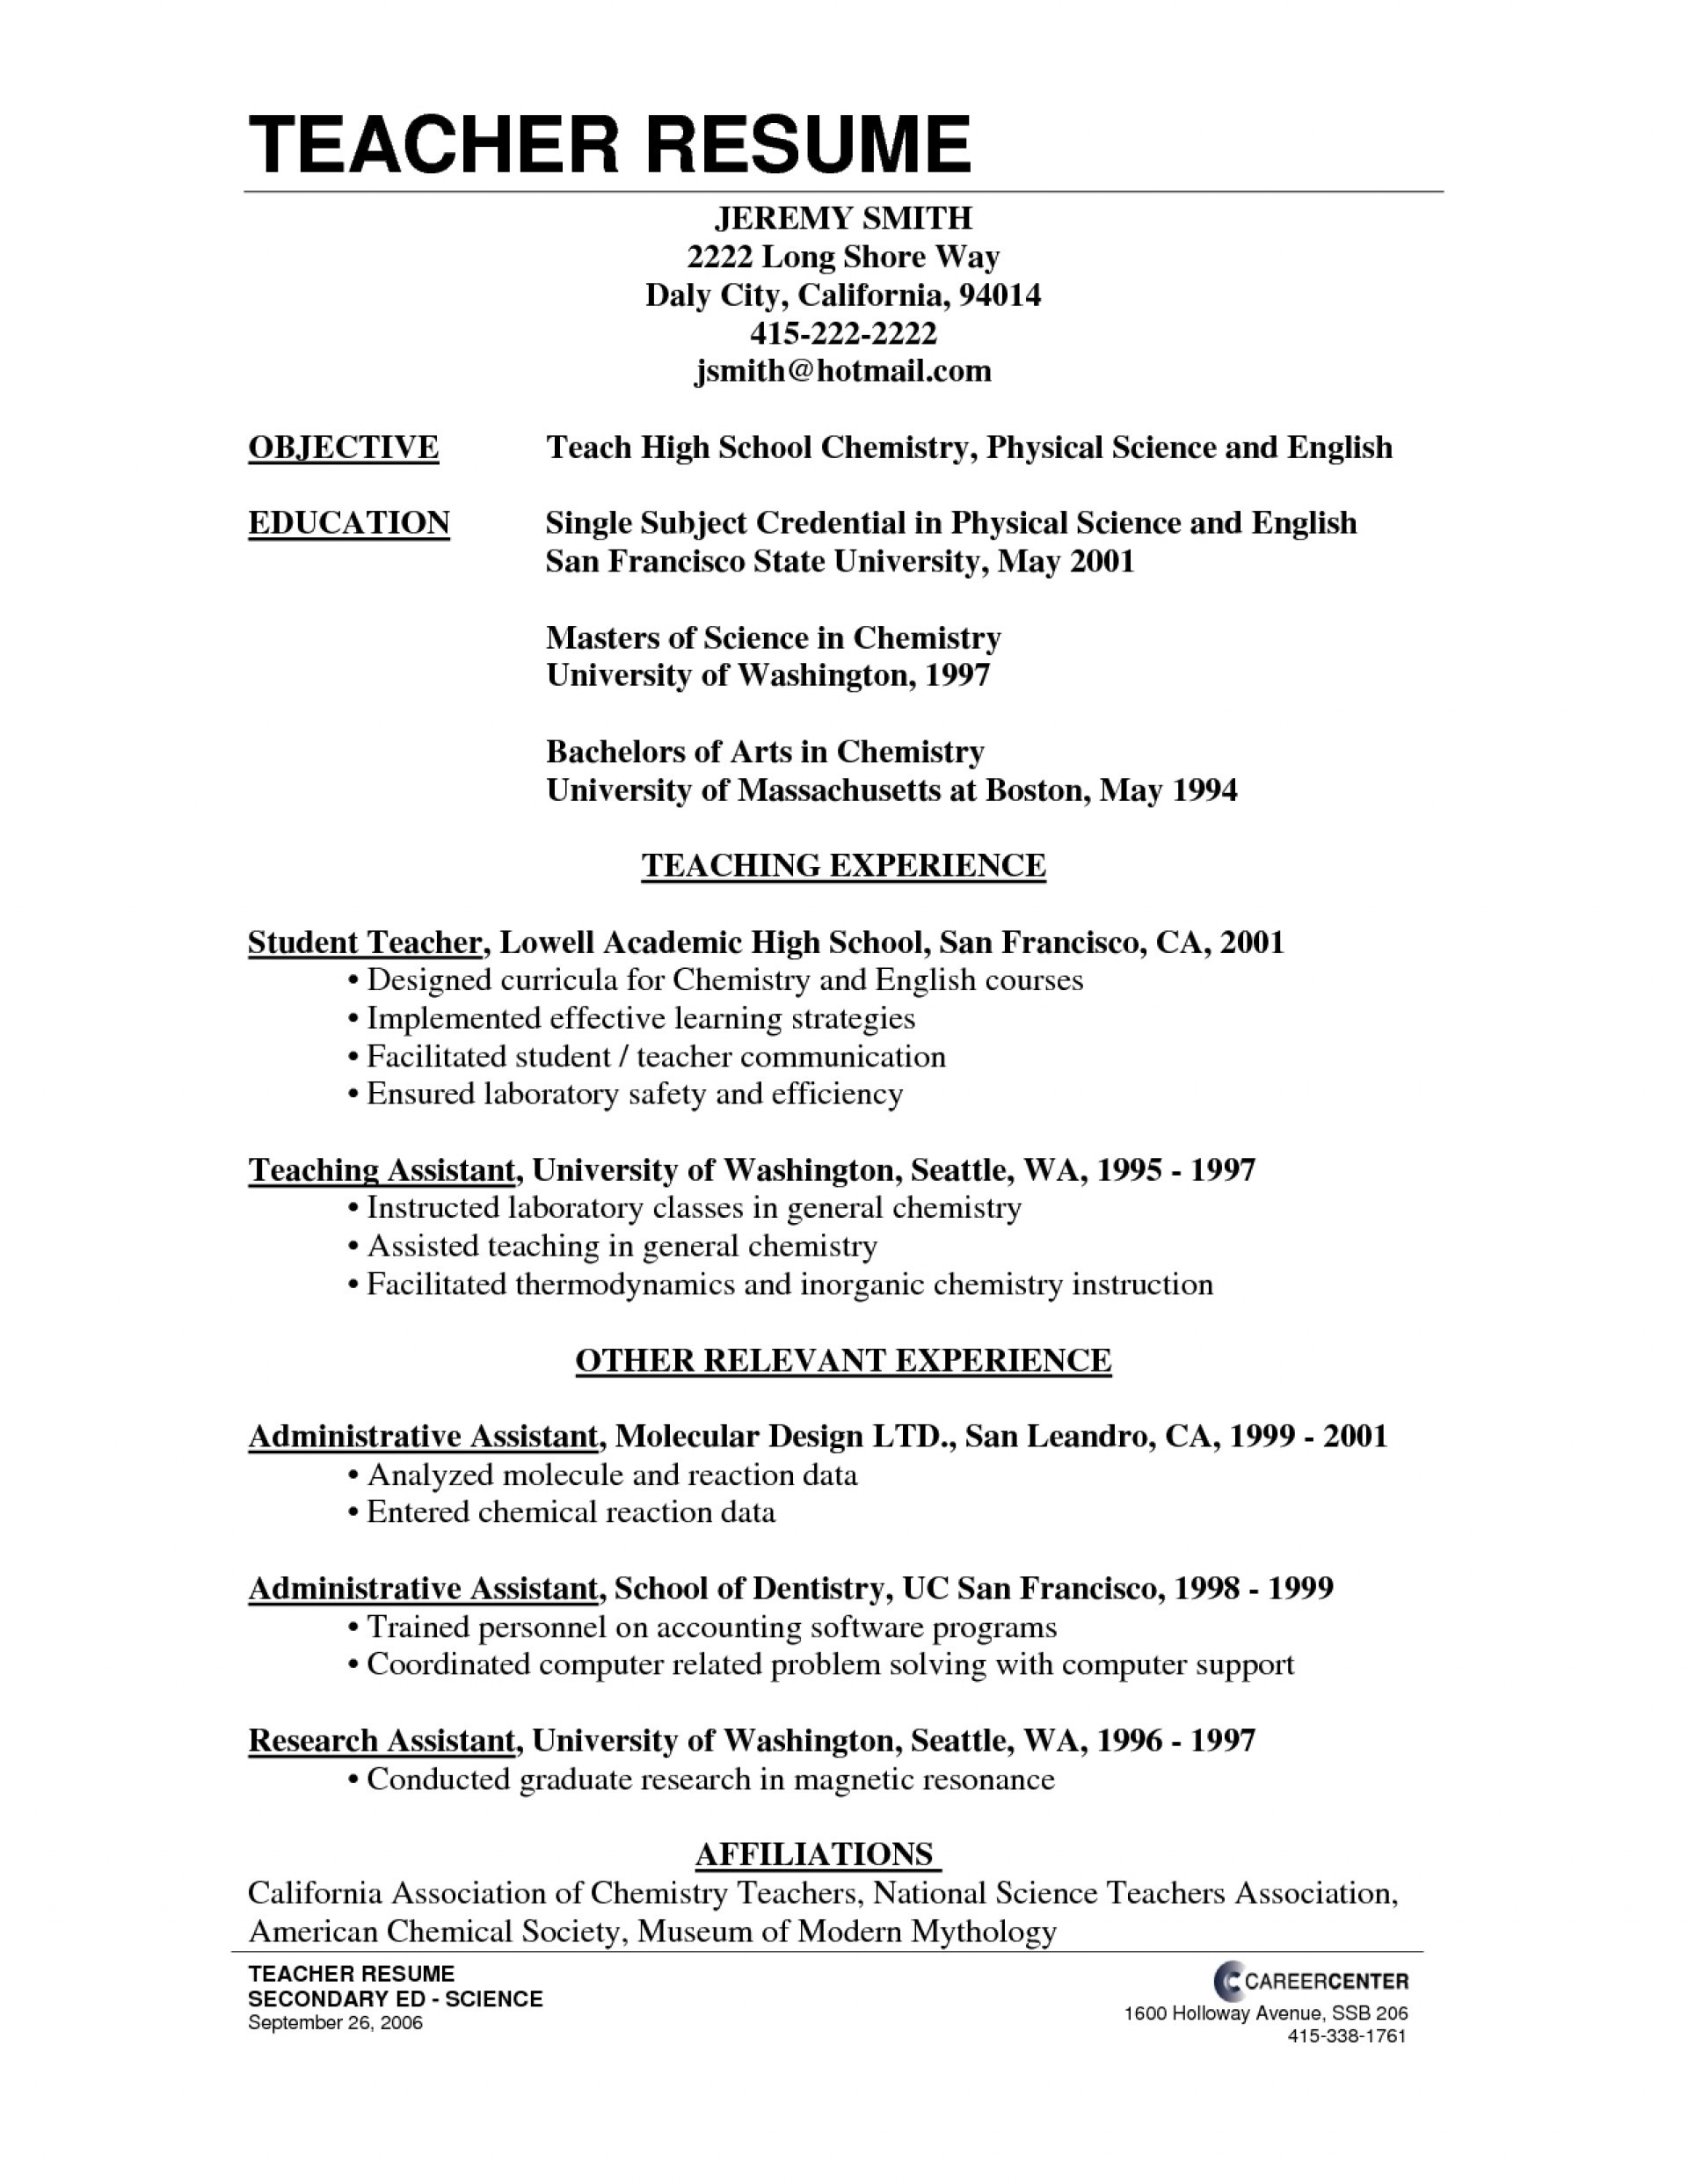 Resume Profile Examples Resume Samples Administrative Assistant Professional Resume Profile Examples Executive Assistant Cool Image Skills Based Of Resume Samples Administrative Assistant resume profile examples|wikiresume.com